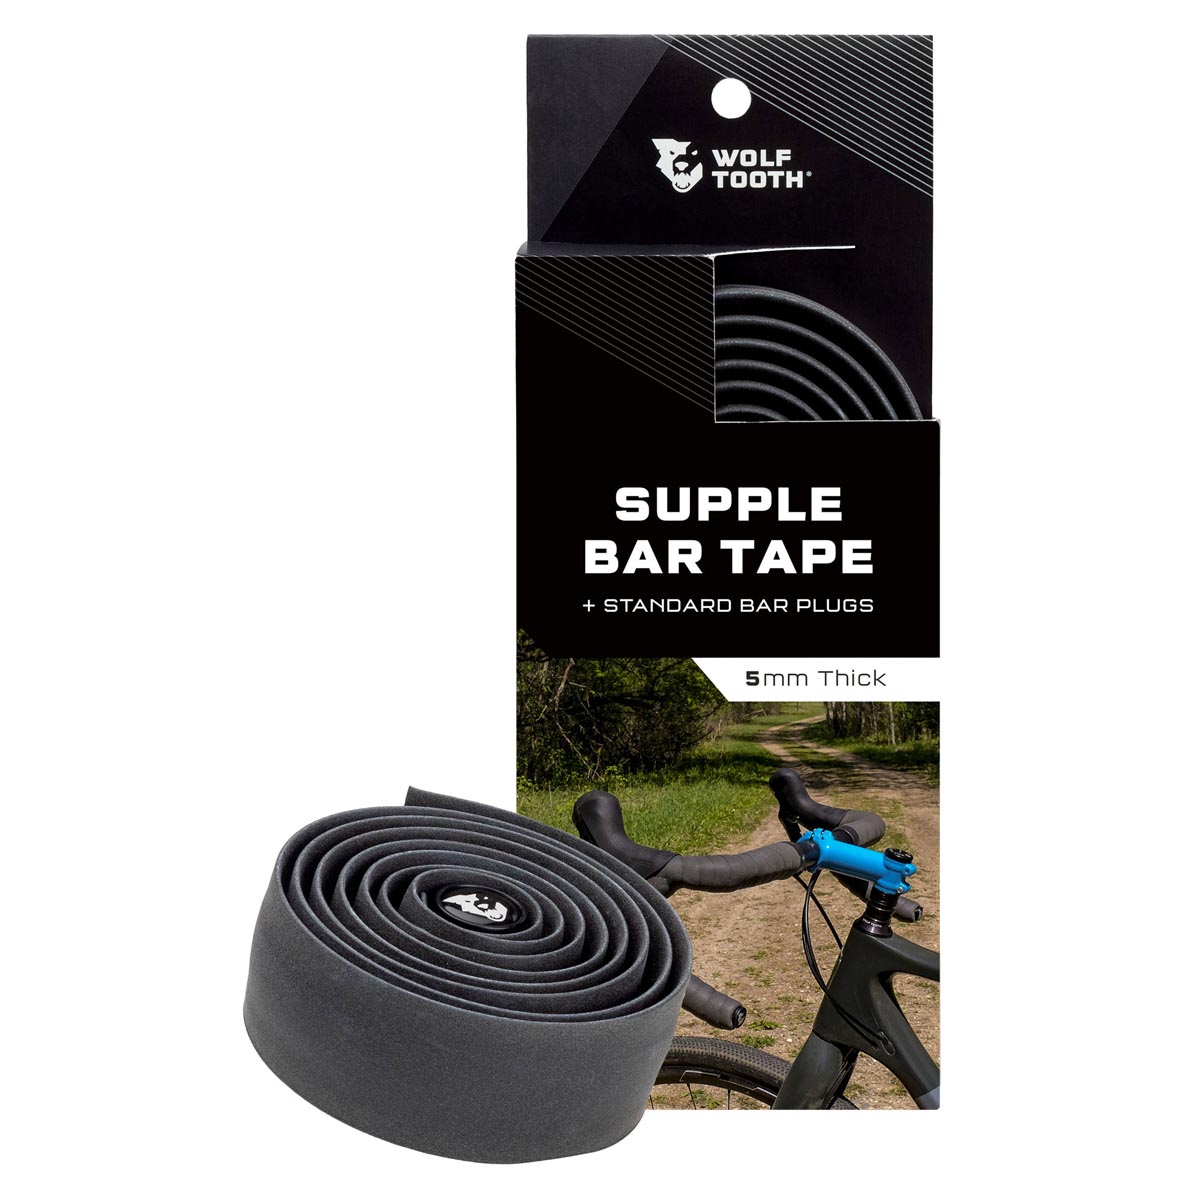 Wolf Tooth Supple Bar Tape package